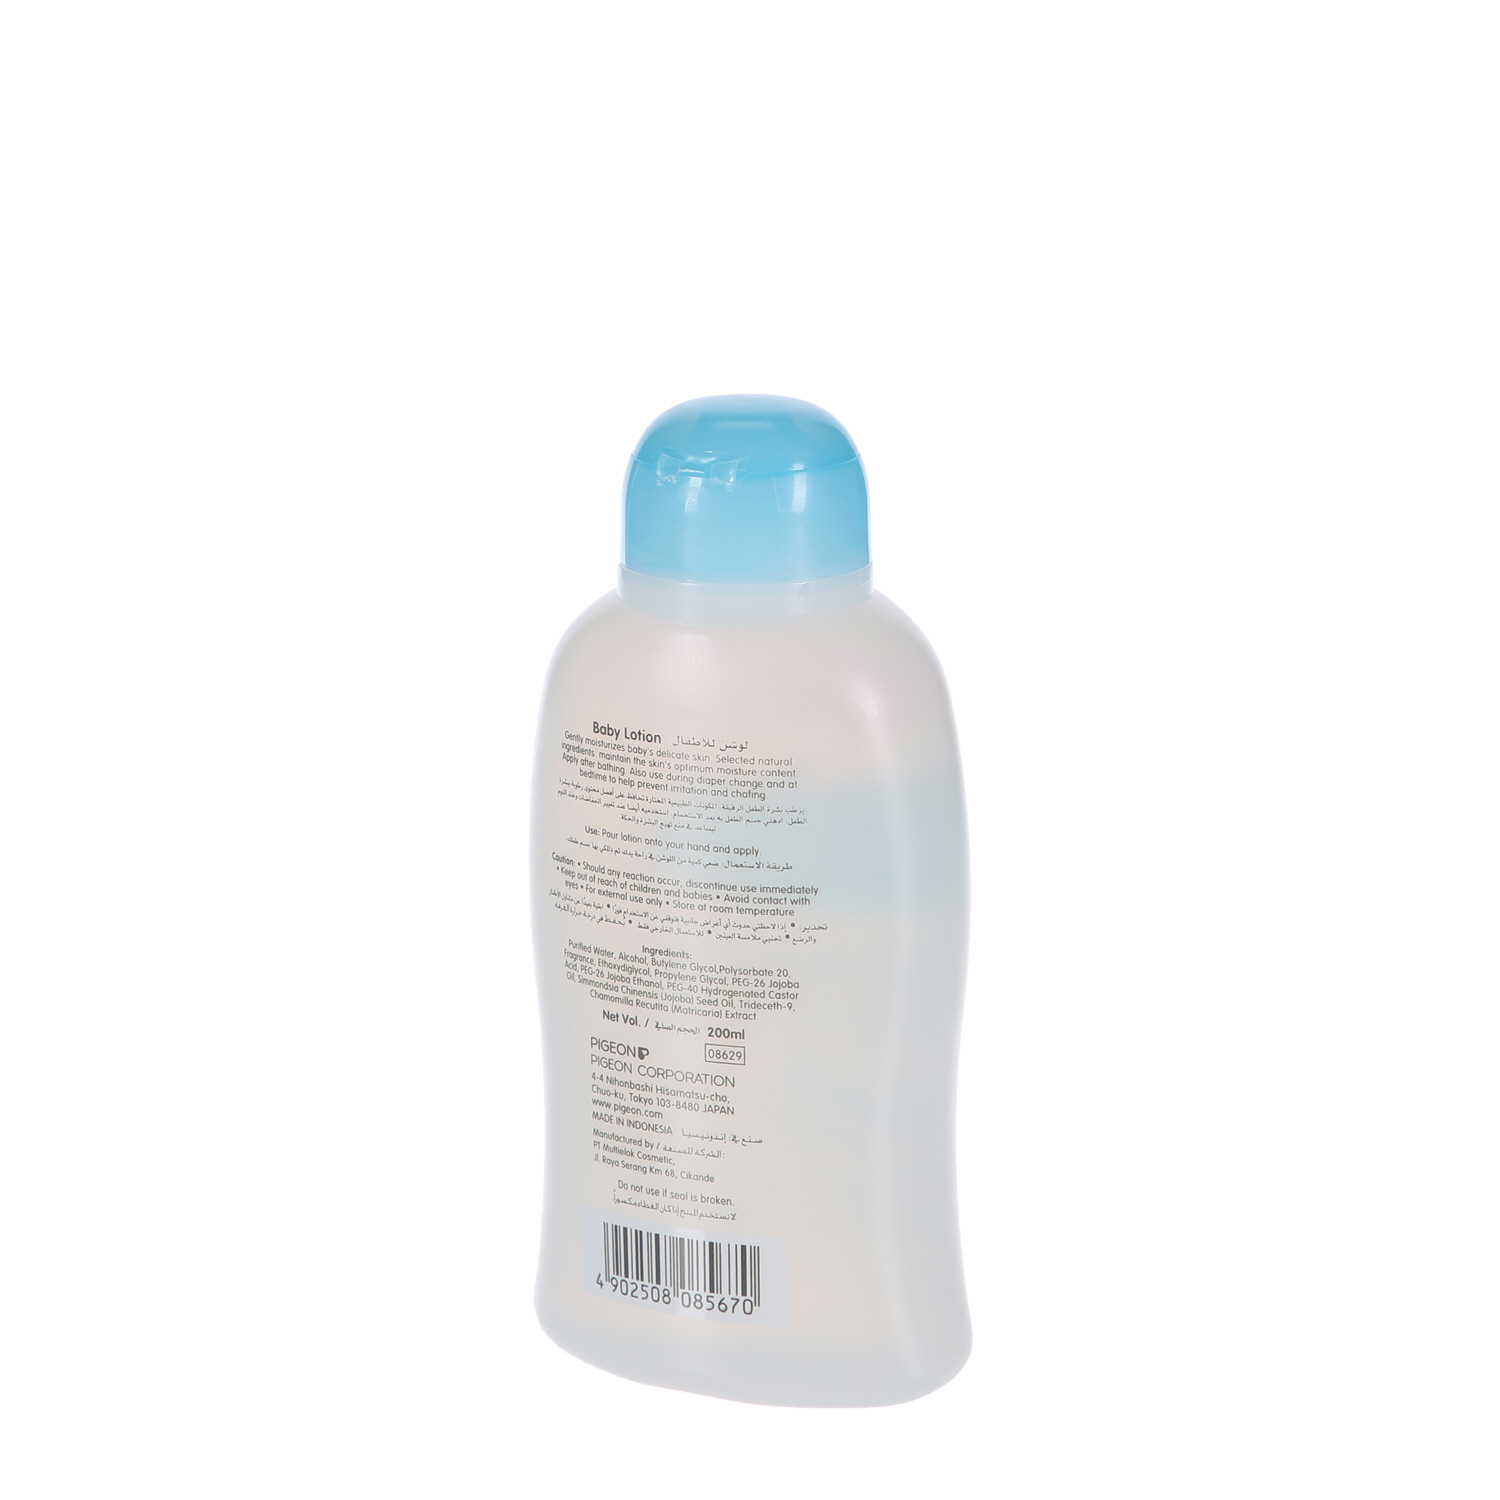 Pigeon Baby Lotion 200 ml